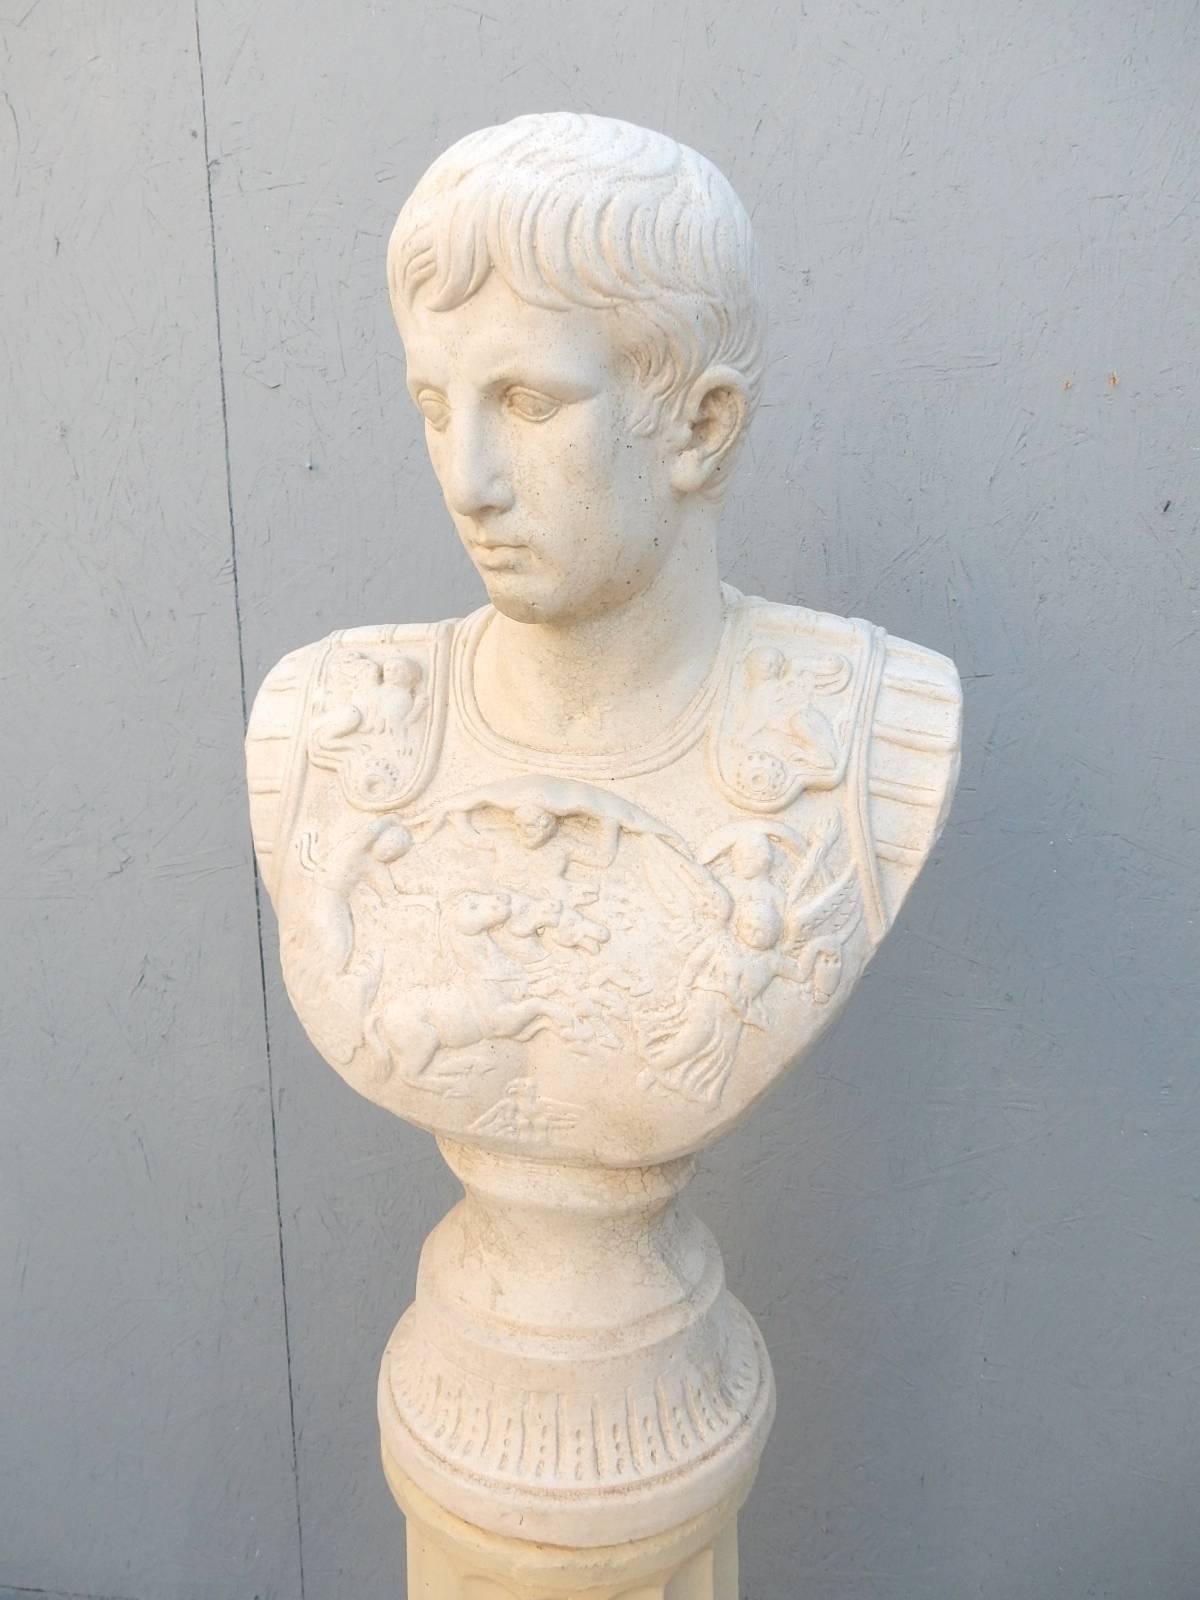 Large life-size cast bust of Julius Caesar on a column pedestal,
circa 1950s. Fantastic life like detail and very heavy made of stone cement.
Two pieces, bust not connected to column.